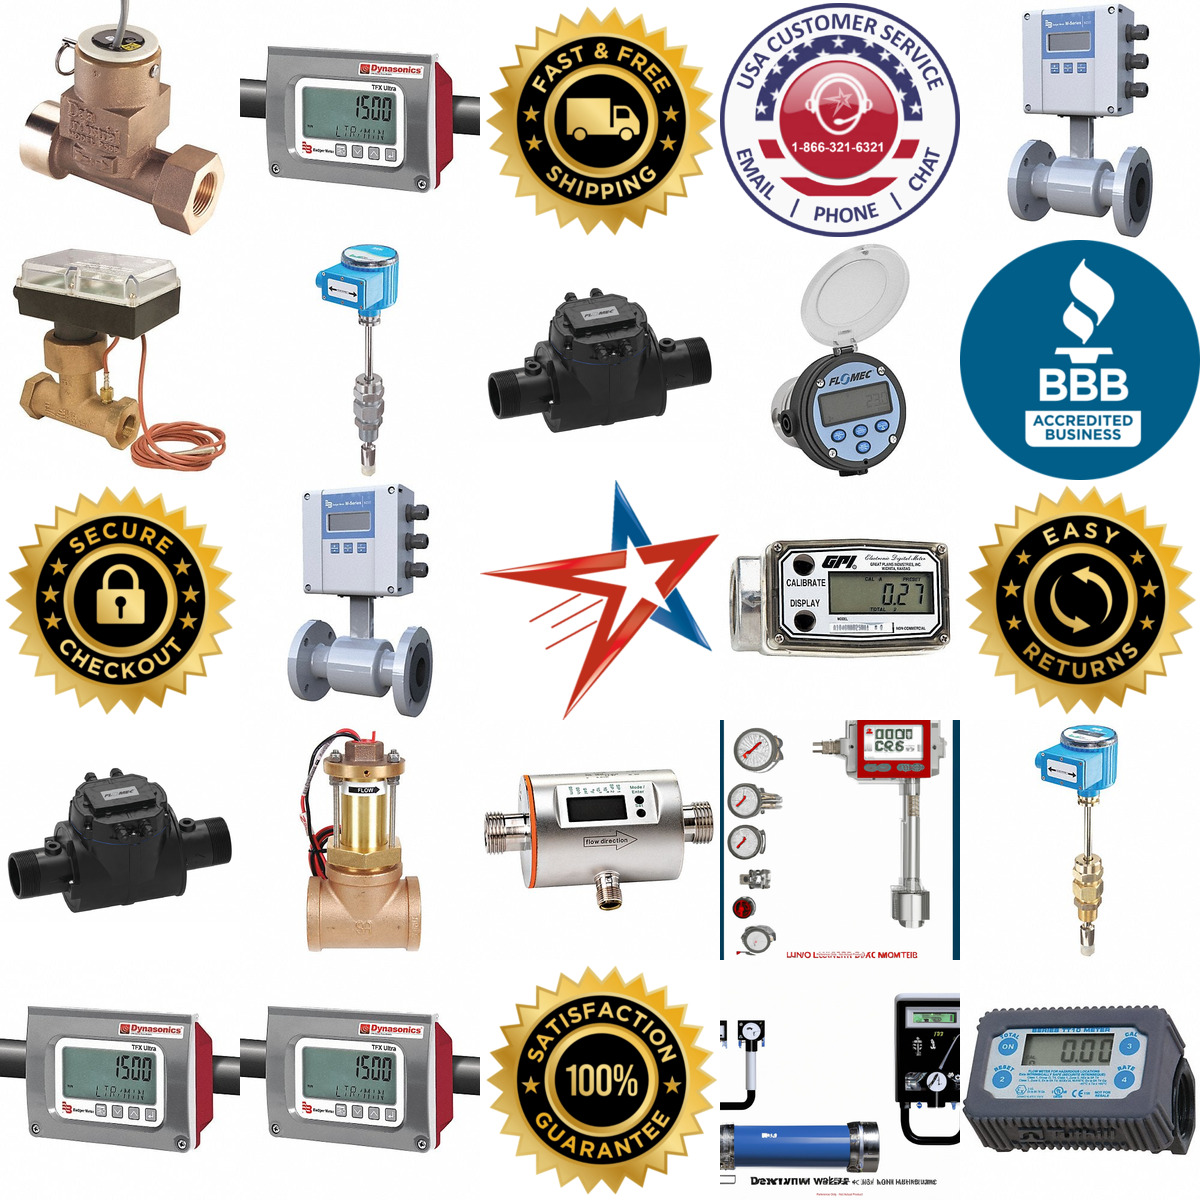 A selection of Electronic Flowmeters products on GoVets